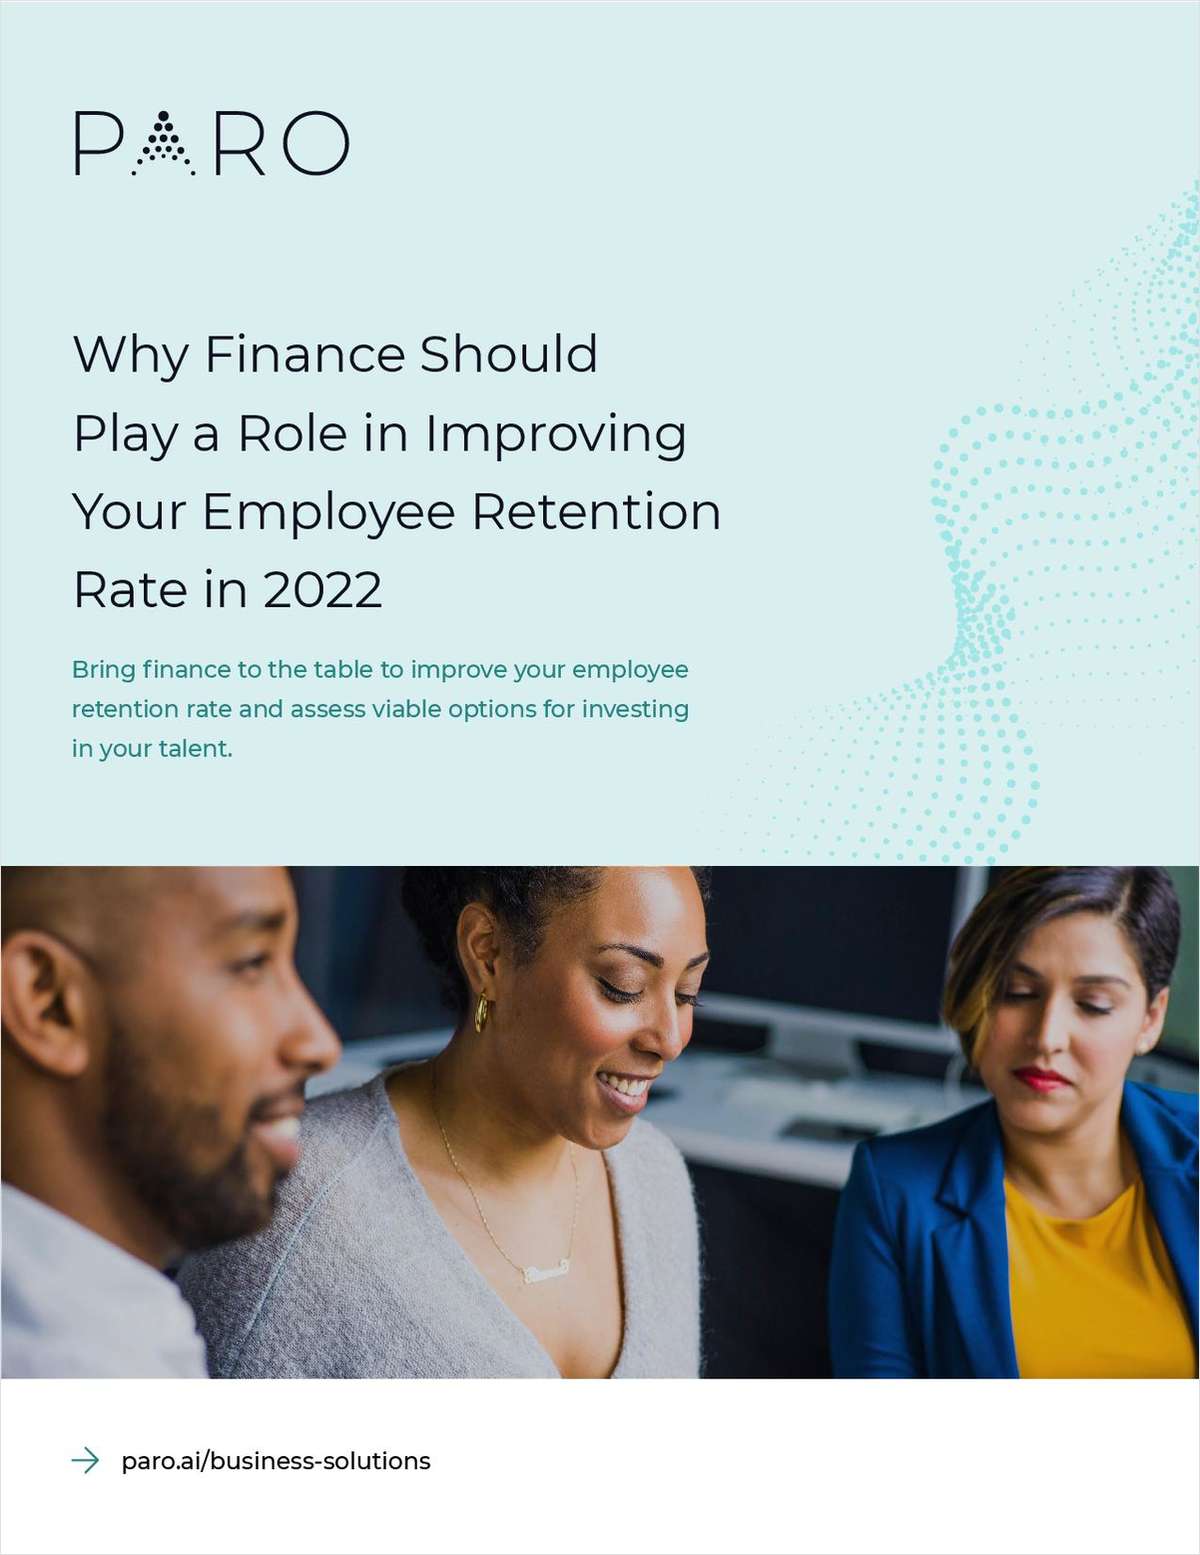 Why Finance Should Play a Role in Improving Your Employee Retention Rate in 2022